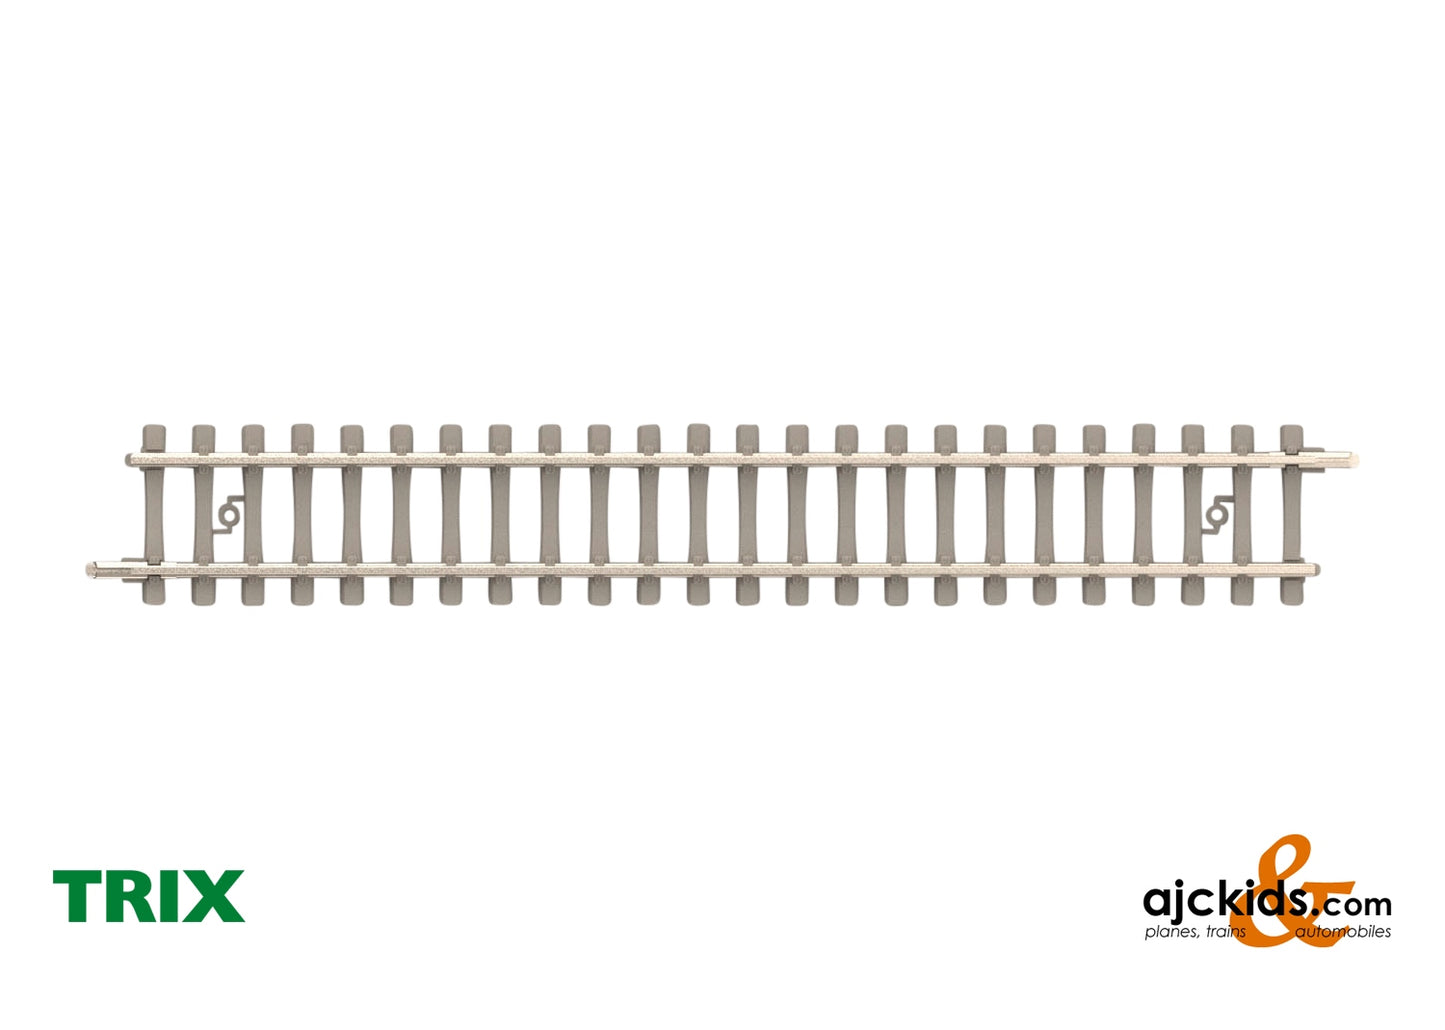 Trix 14504 - Straight Track with Concrete Ties